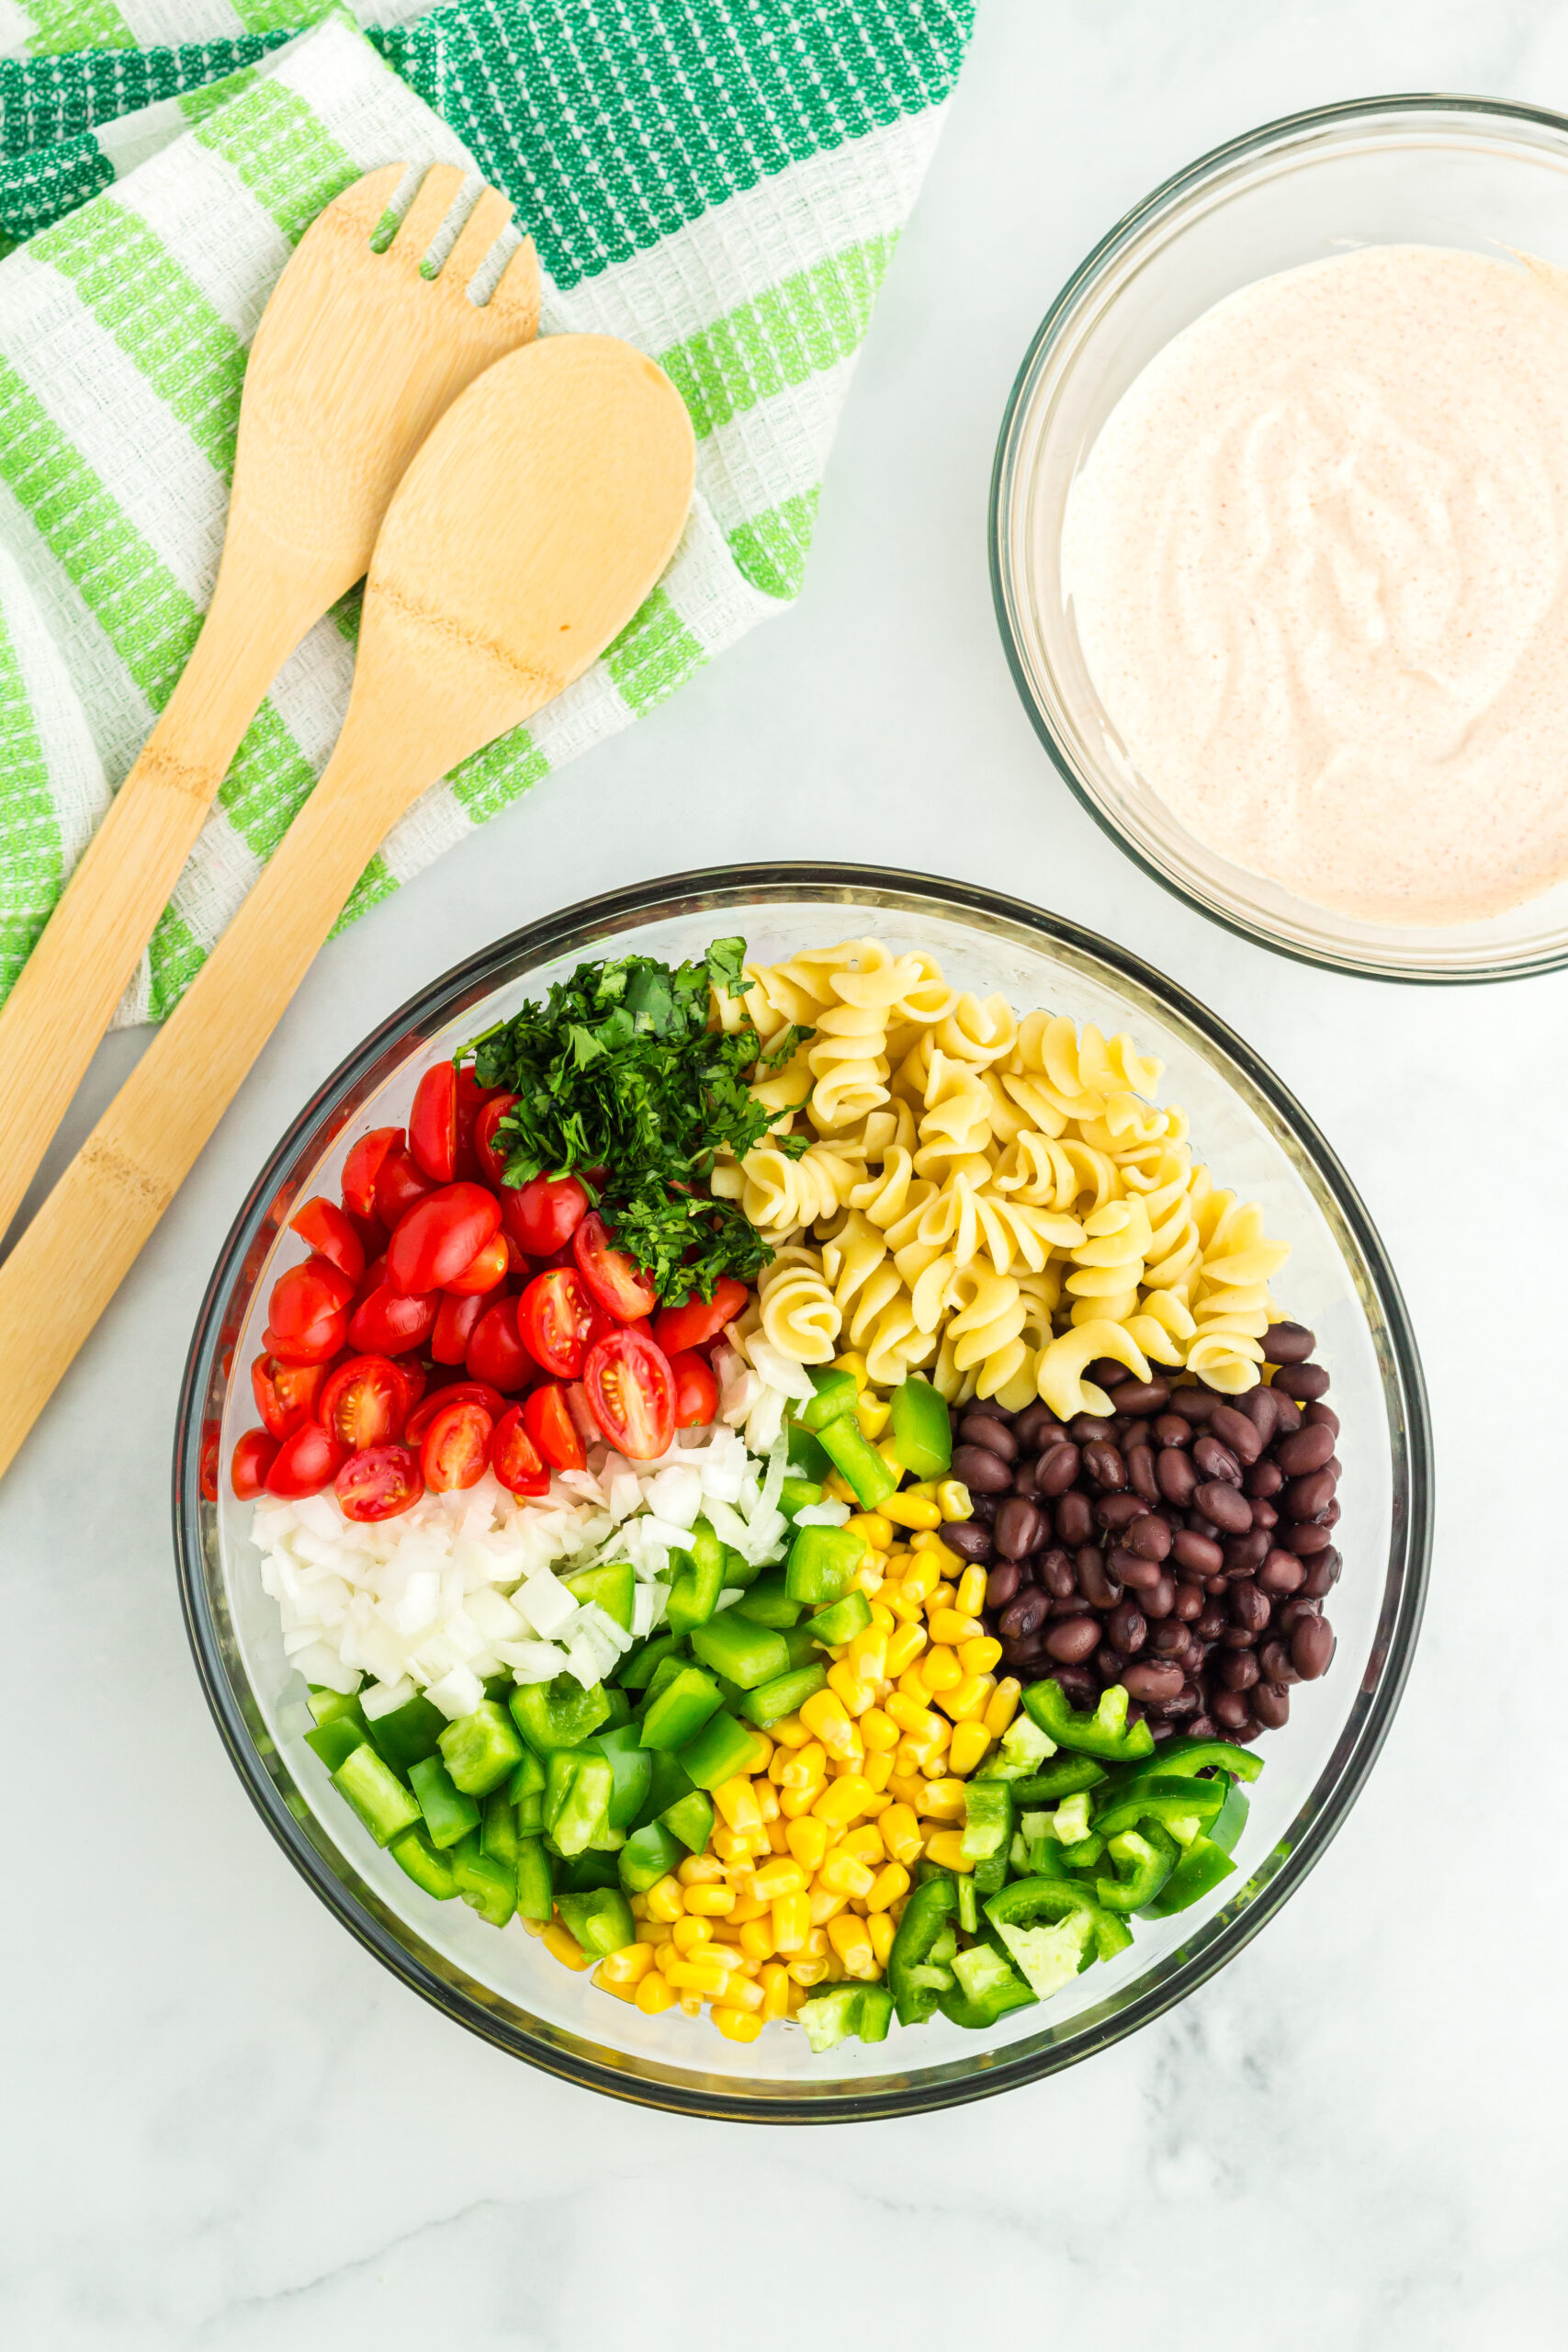 southwest pasta salad ingredients placed in a glass bowl before mixing